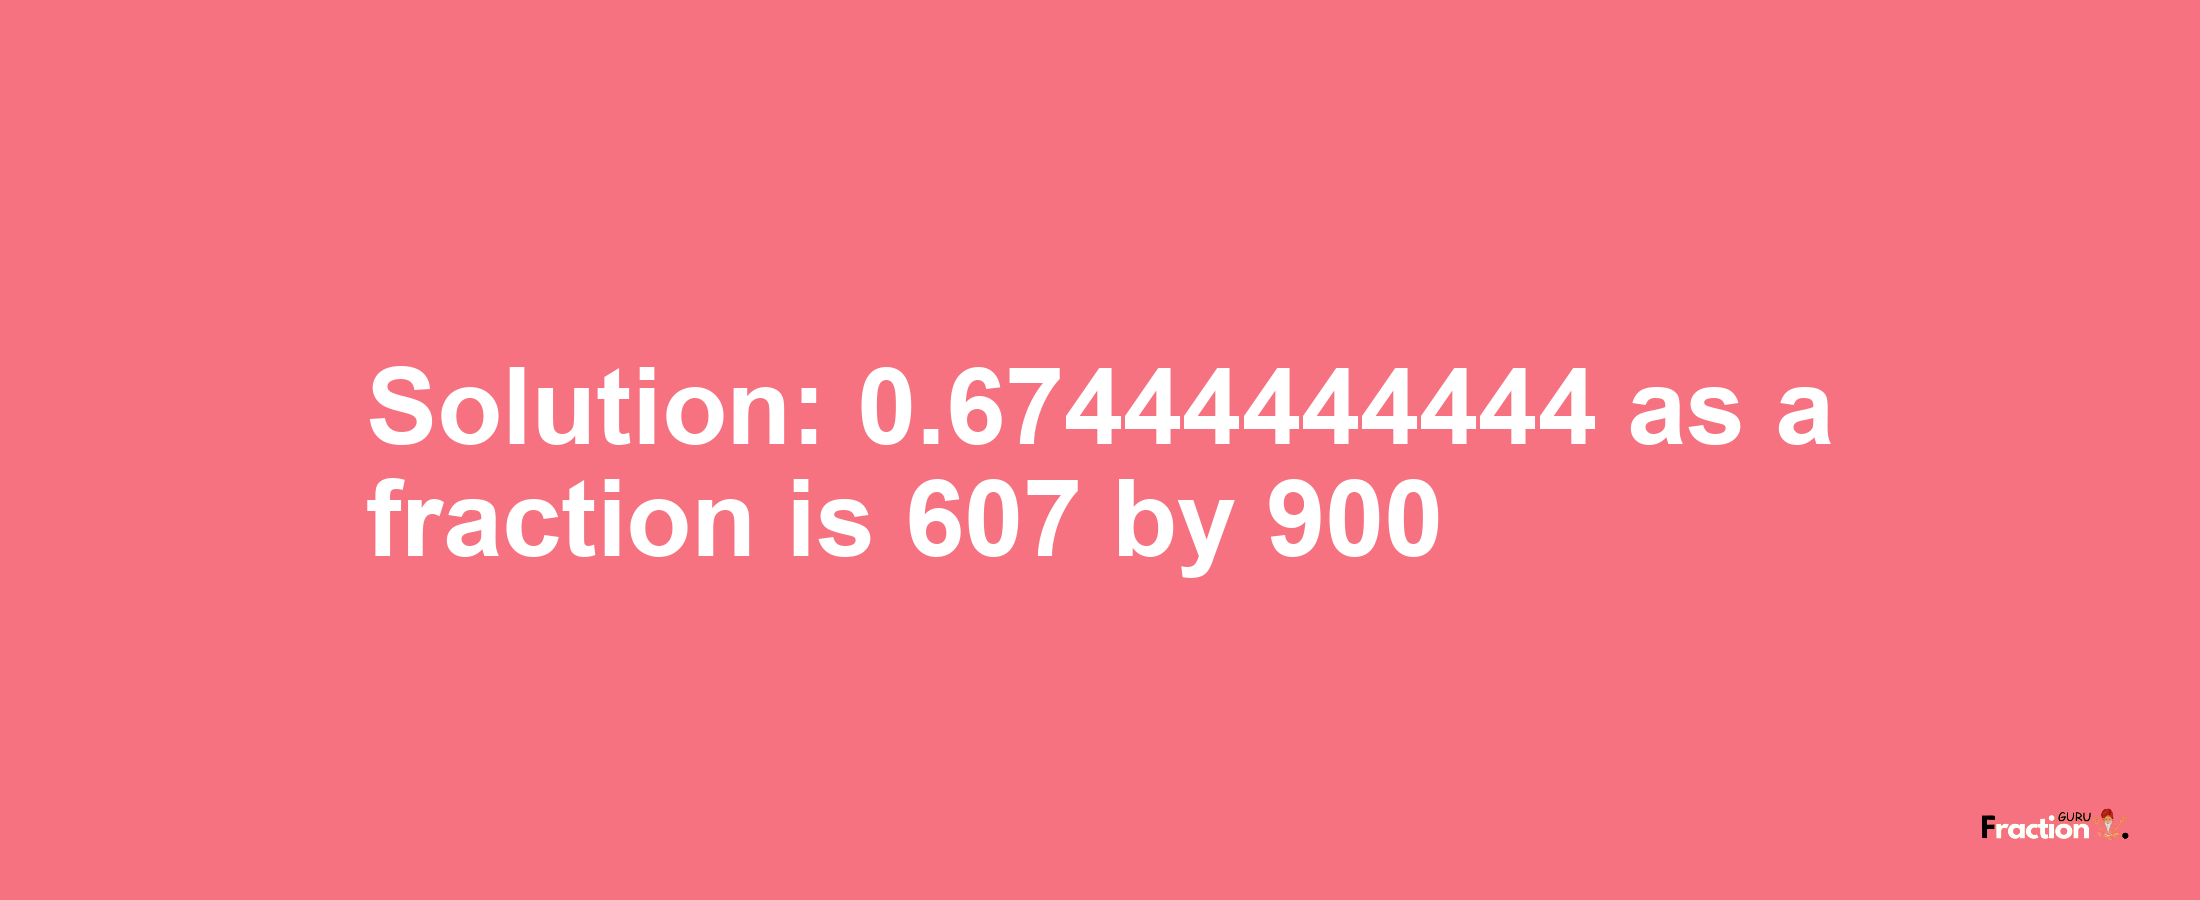 Solution:0.67444444444 as a fraction is 607/900